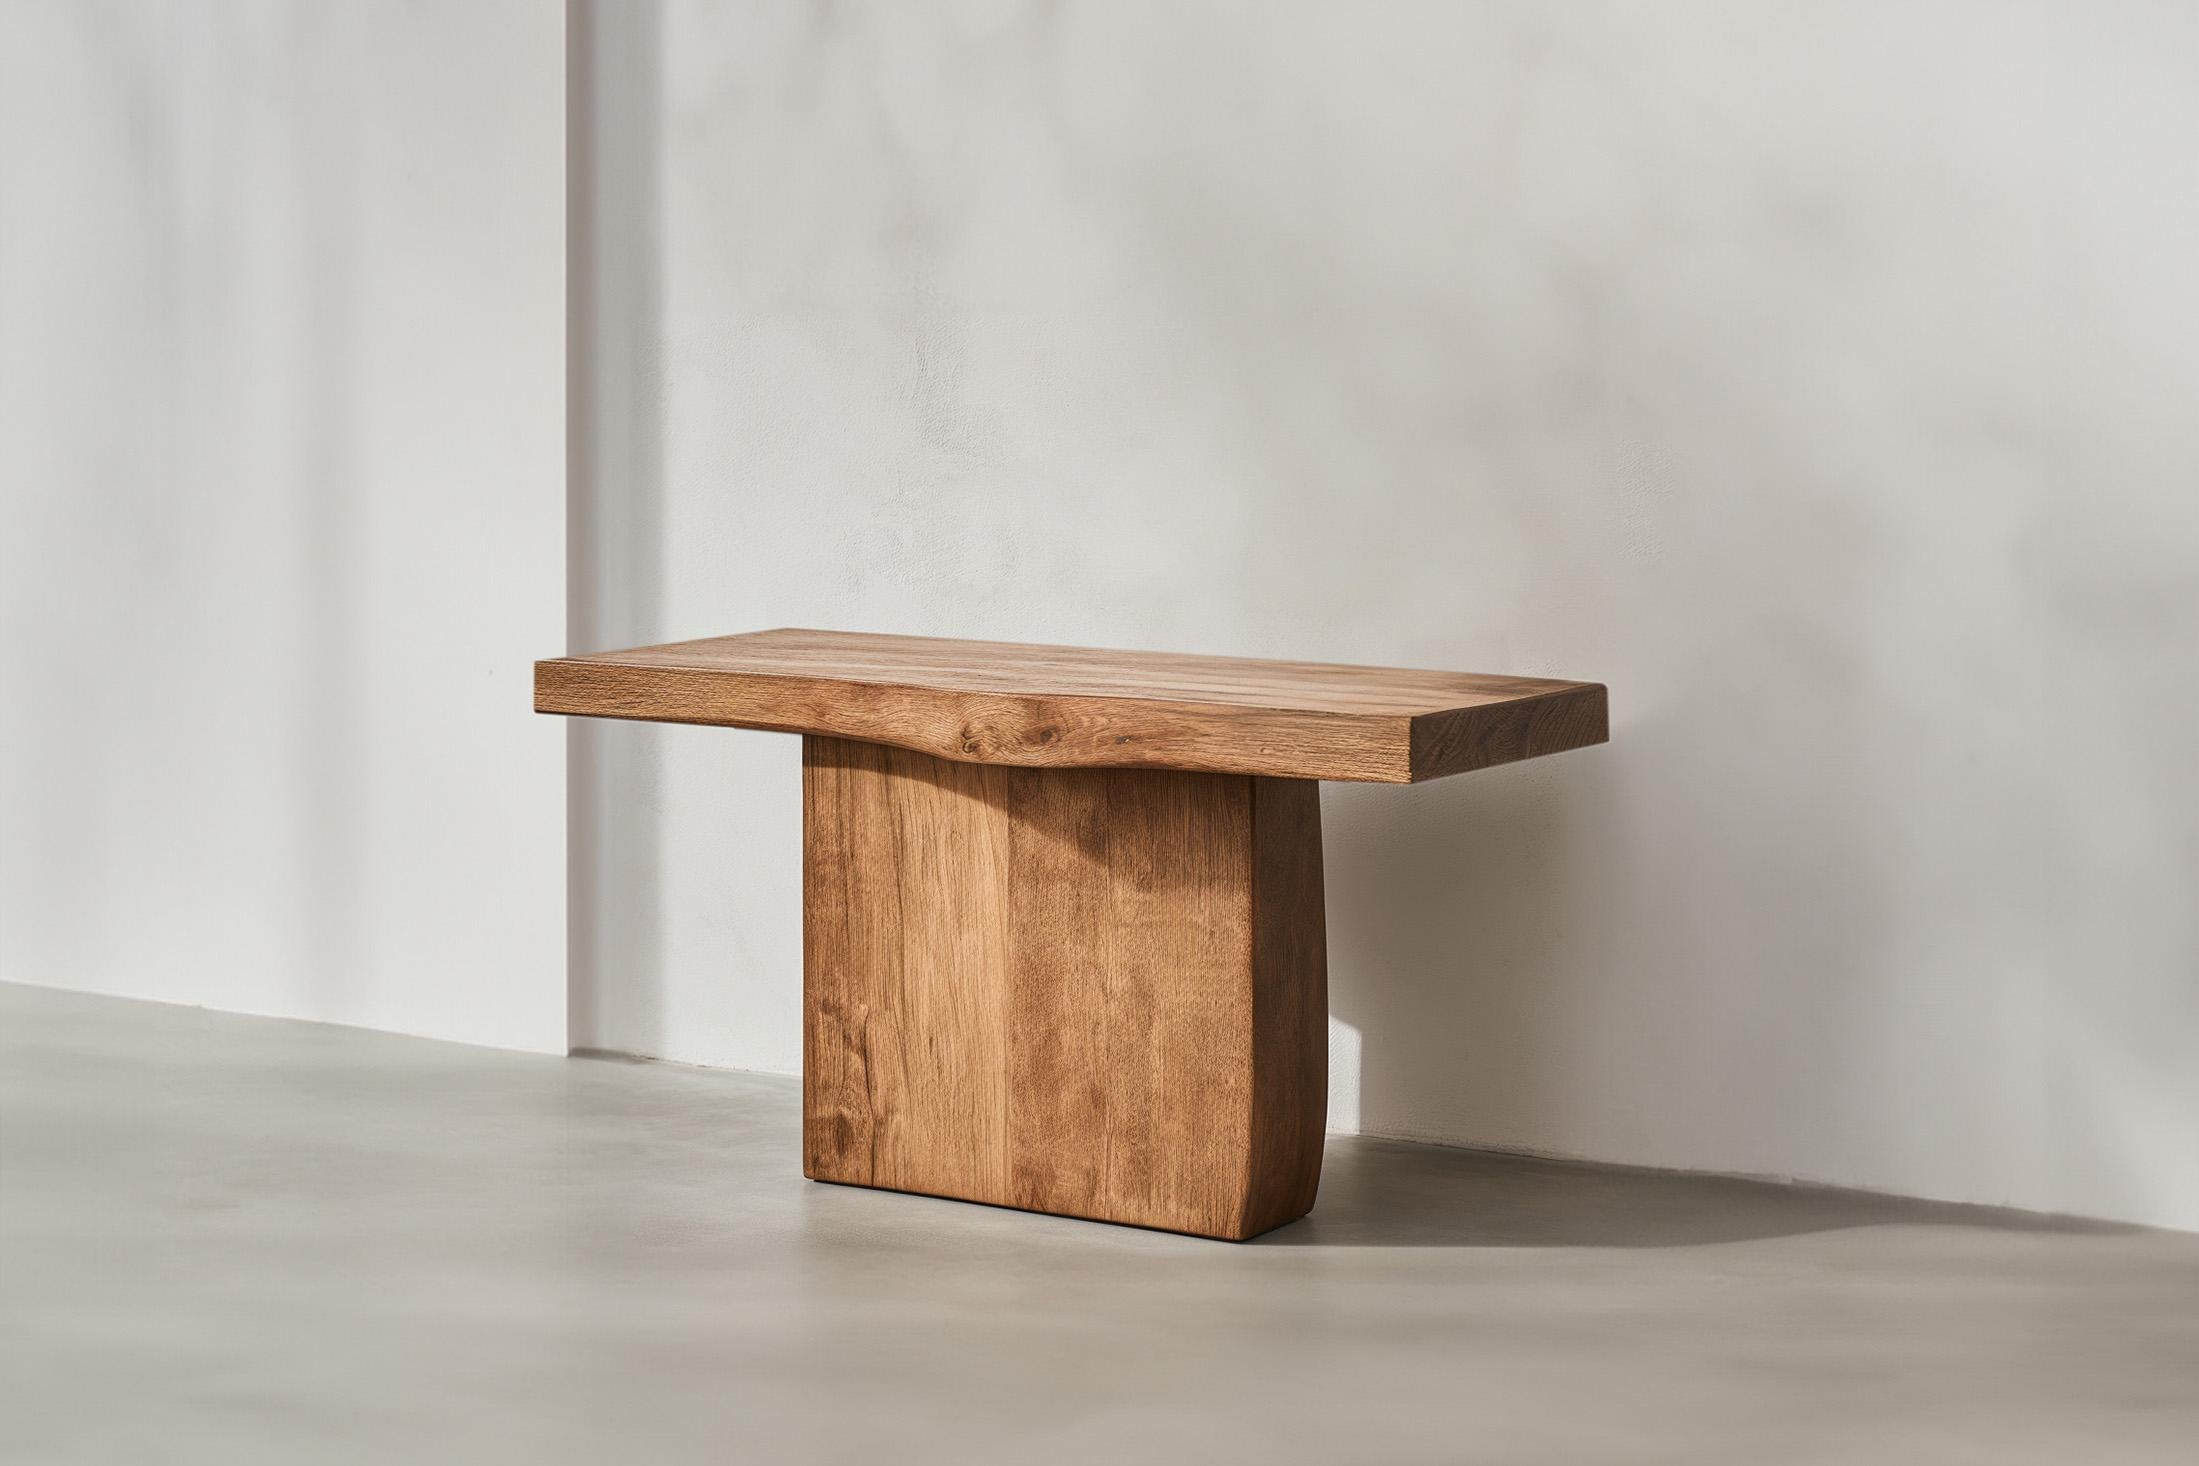 Svelte Elefante Console 18, NONO Design, Tactile Oak Finish
—————————————————————
Elefante Collection: A Harmony of Design and Heritage by NONO

Crafting Elegance with a Modernist Touch

NONO, renowned for its decade-long journey in redefining